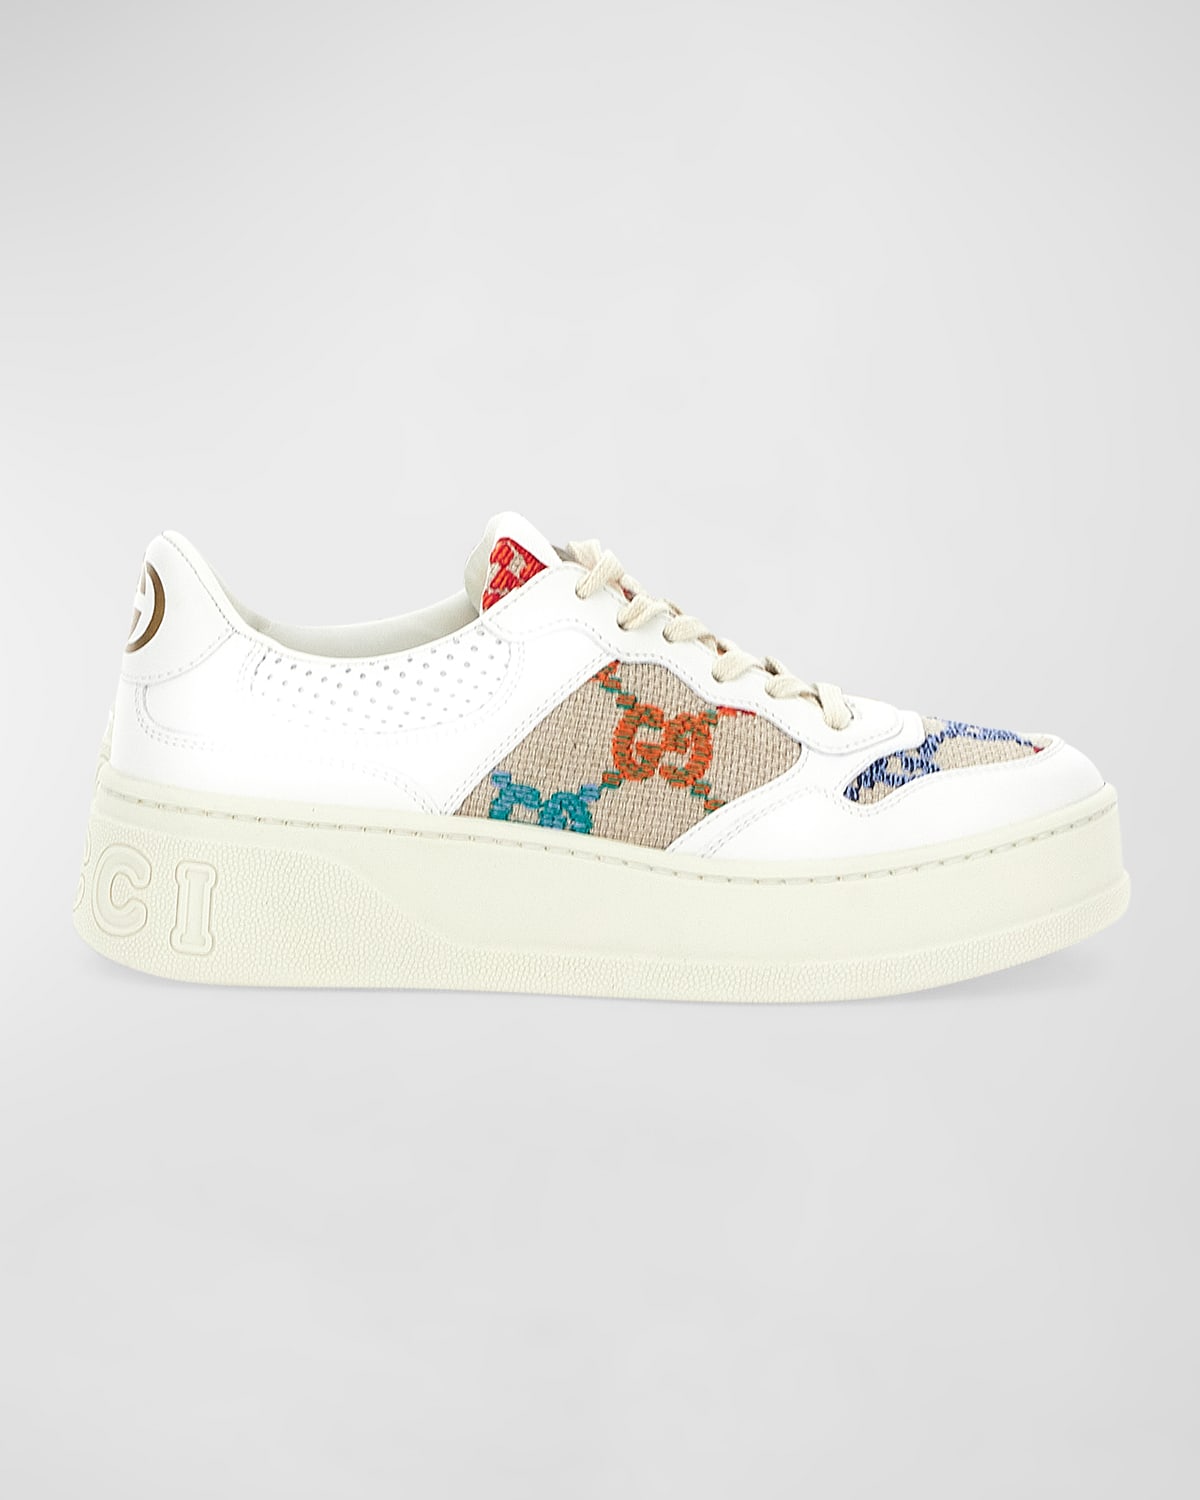 GG Multicolored Low-Top Sneakers